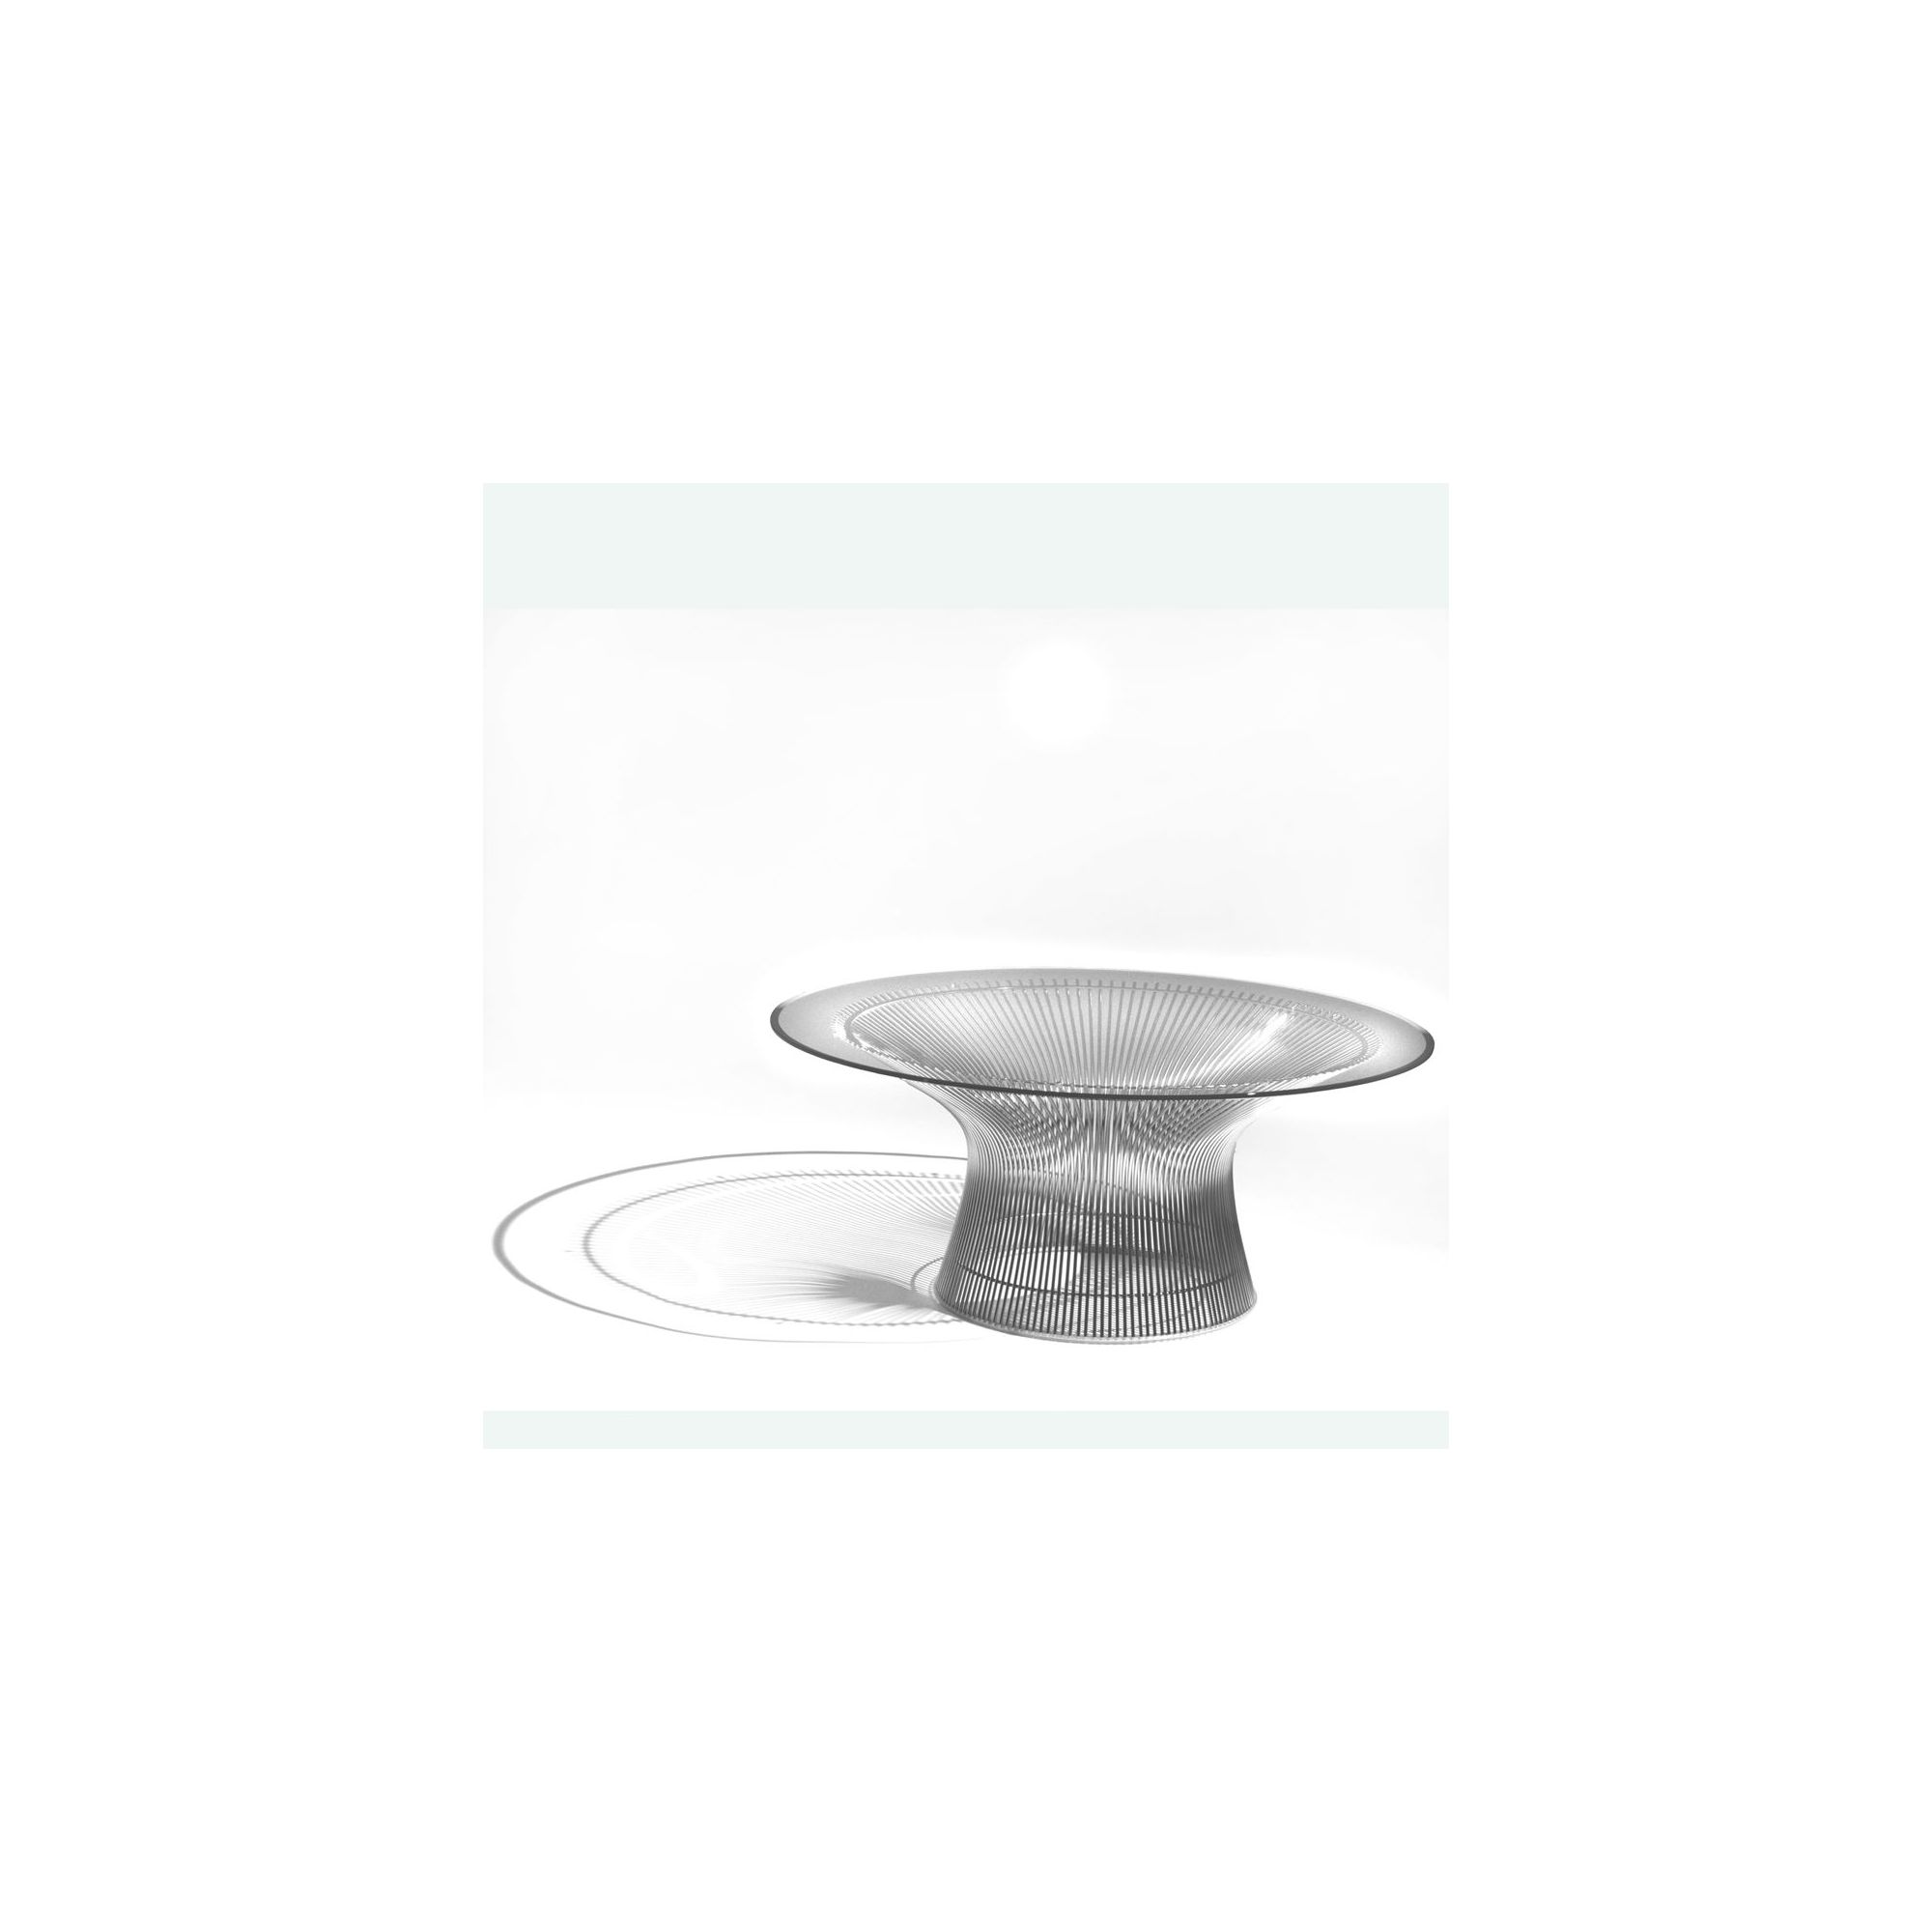 Knoll Coffee Table by Warren Platner - 107cm Dia / Polished Nickel / Clear Glass at Tesco Direct